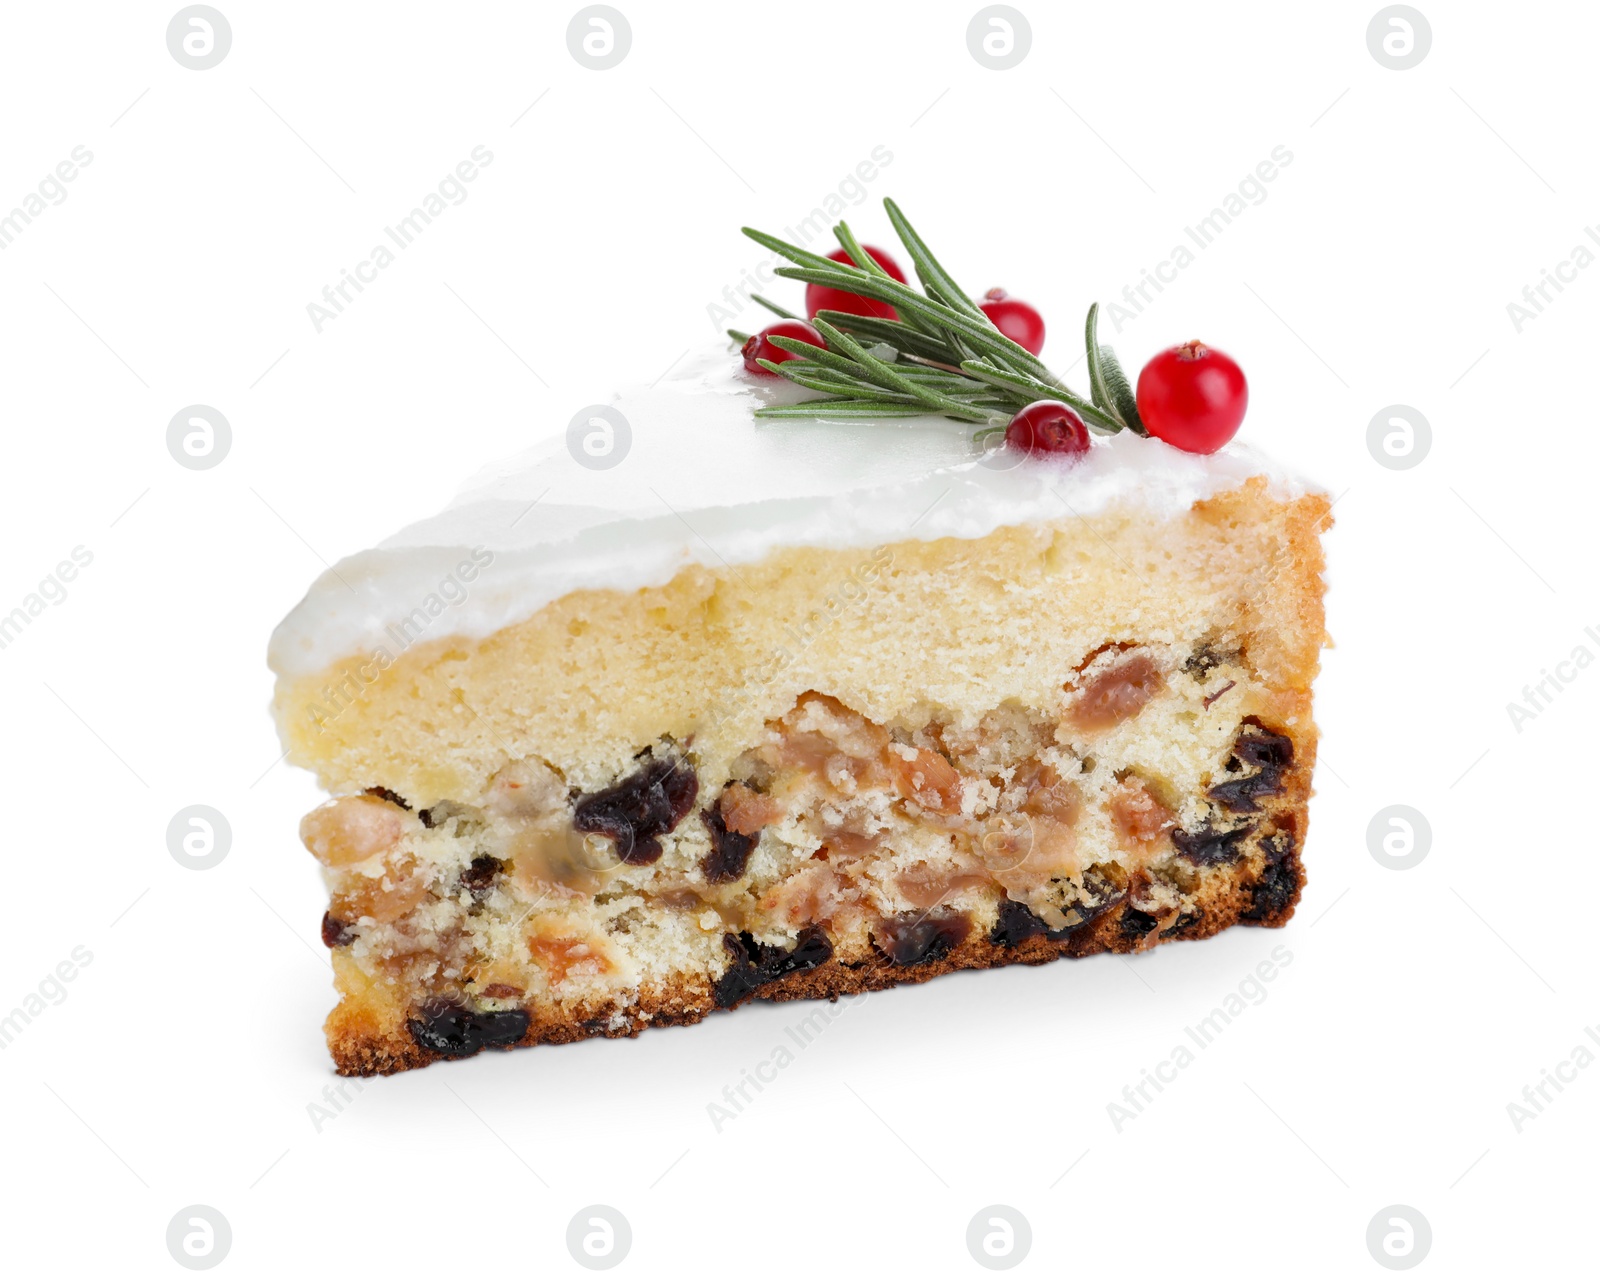 Photo of Slice of traditional Christmas cake decorated with rosemary and cranberries isolated on white